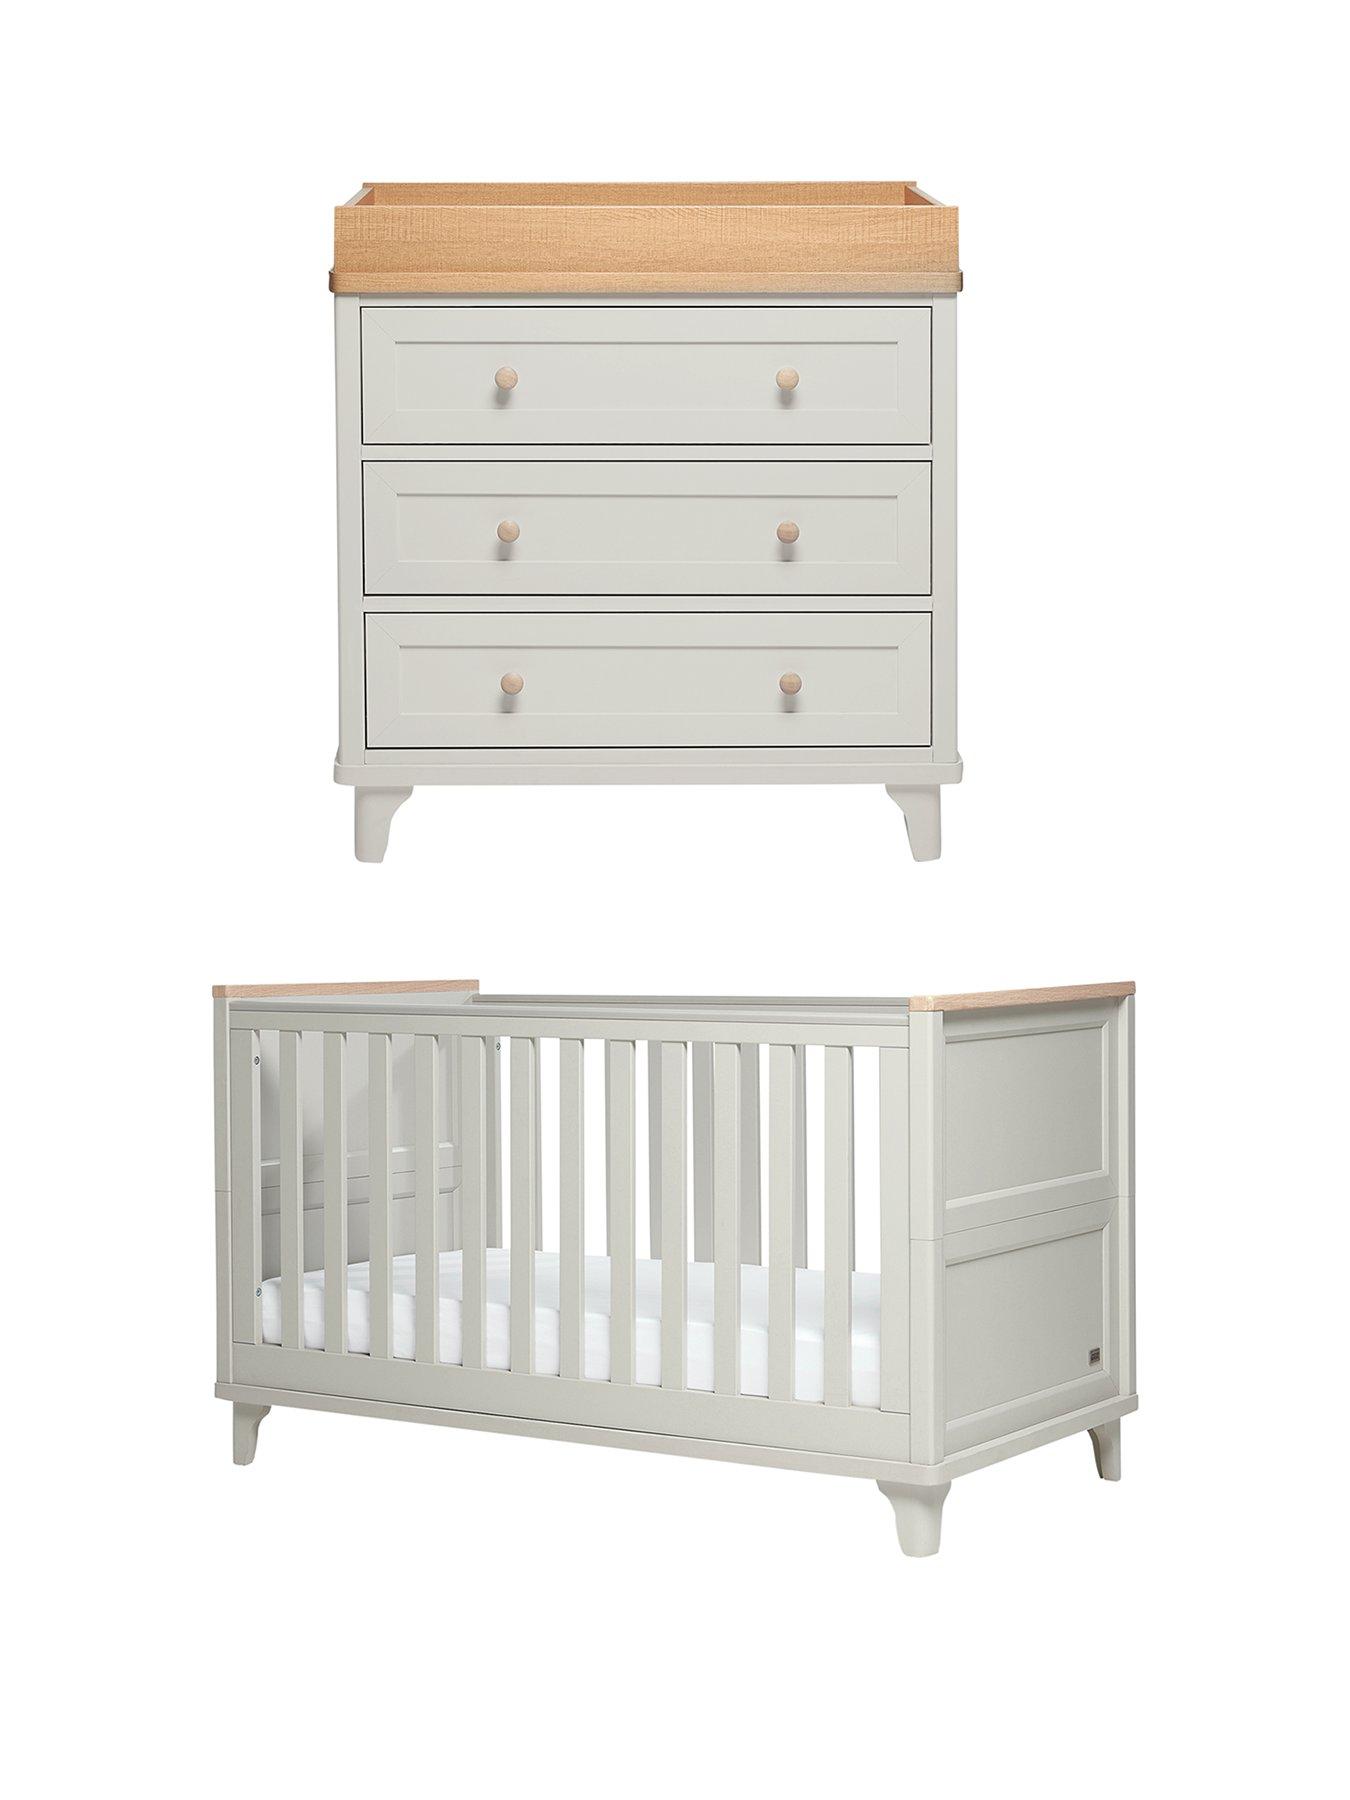 Mamas Papas Lucca Cot Bed And Dresser Changer